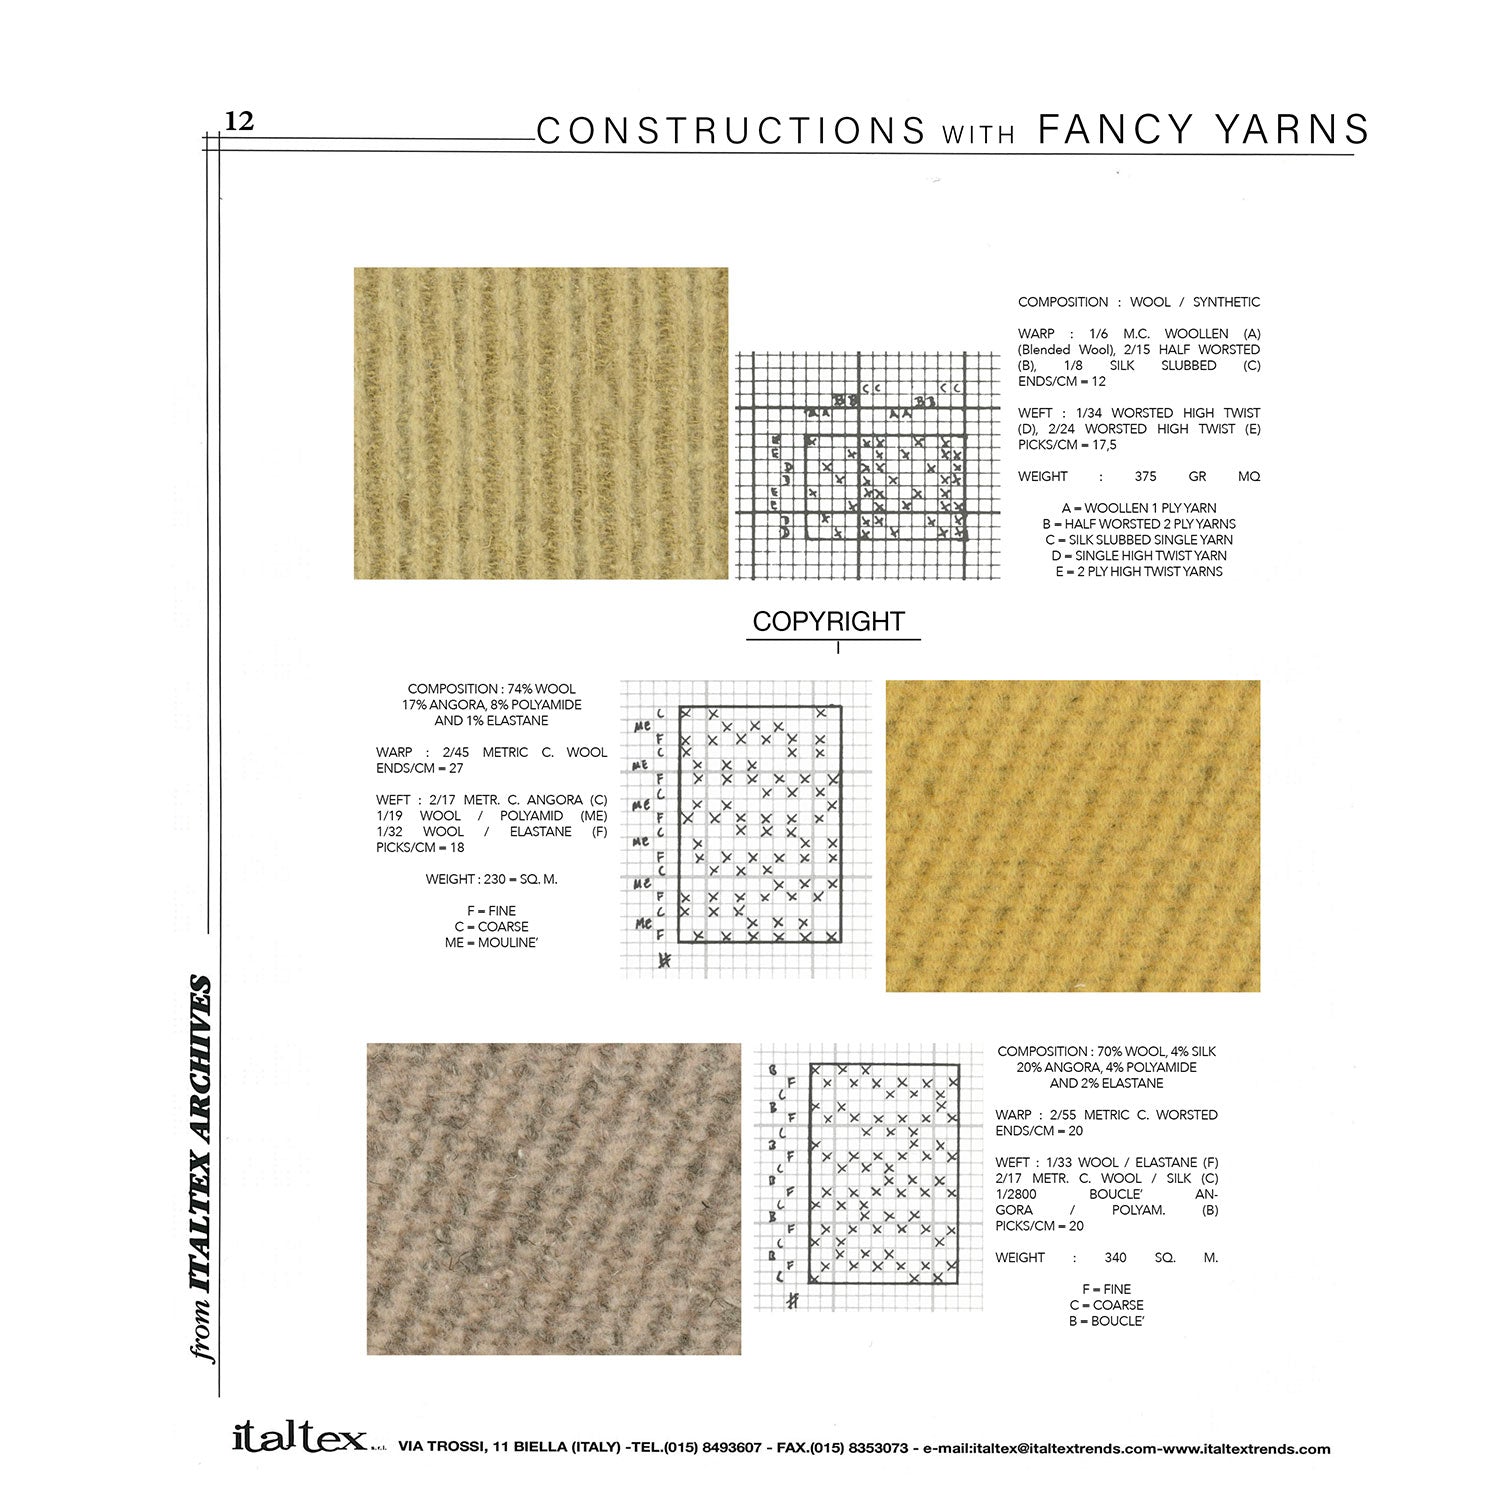 Ebook Constructions with fancy yarns